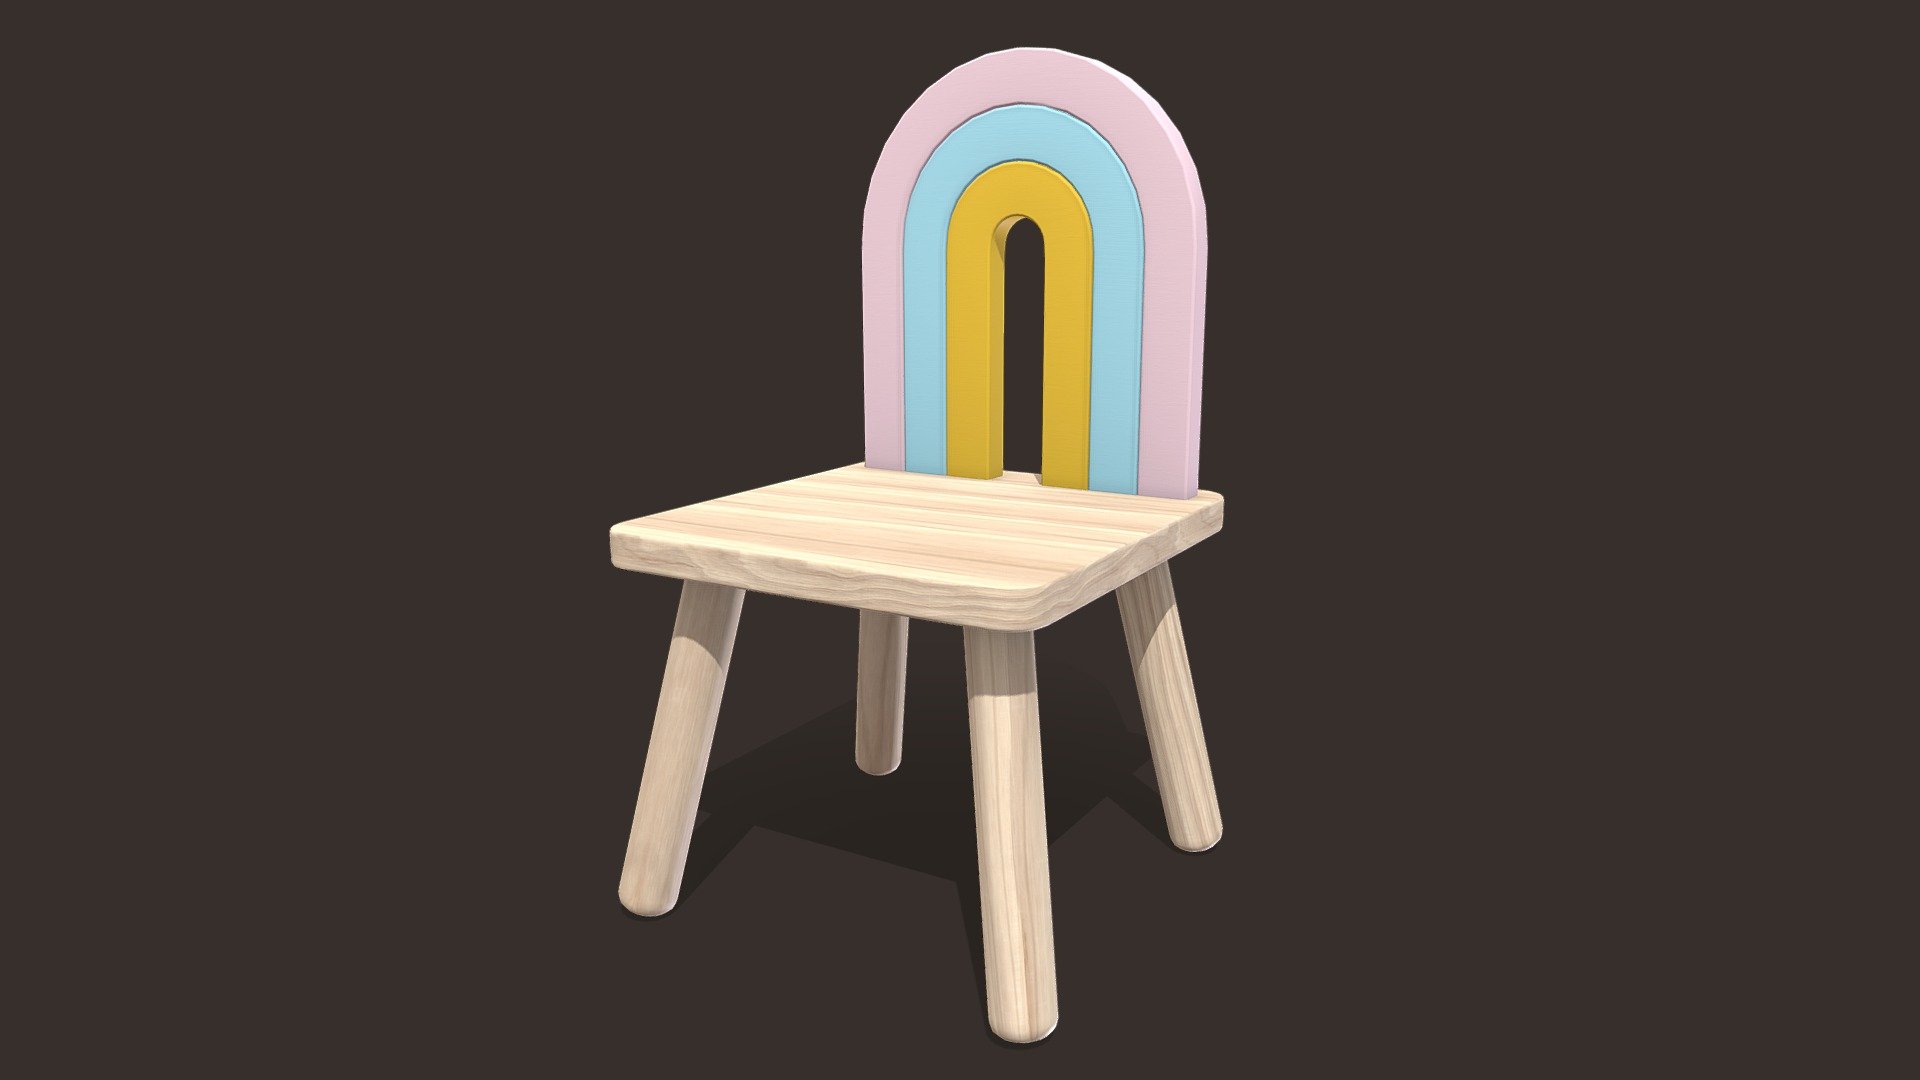 Children chair is a model that will enhance detail and realism to any of your rendering projects. The model has a fully textured, detailed design that allows for close-up renders, and was originally modeled in Blender 3.5, Textured in Substance Painter 2023 and rendered with Adobe Stagier Renders have no post-processing.

Features: -High-quality polygonal model, correctly scaled for an accurate representation of the original object. -The model’s resolutions are optimized for polygon efficiency. -The model is fully textured with all materials applied. -All textures and materials are included and mapped in every format. -No cleaning up necessary just drop your models into the scene and start rendering. -No special plugin needed to open scene.

Measurements: Units: M

File Formats: OBJ FBX

Textures Formats: PNG 4k - Children chair - Buy Royalty Free 3D model by MDgraphicLAB 3d model